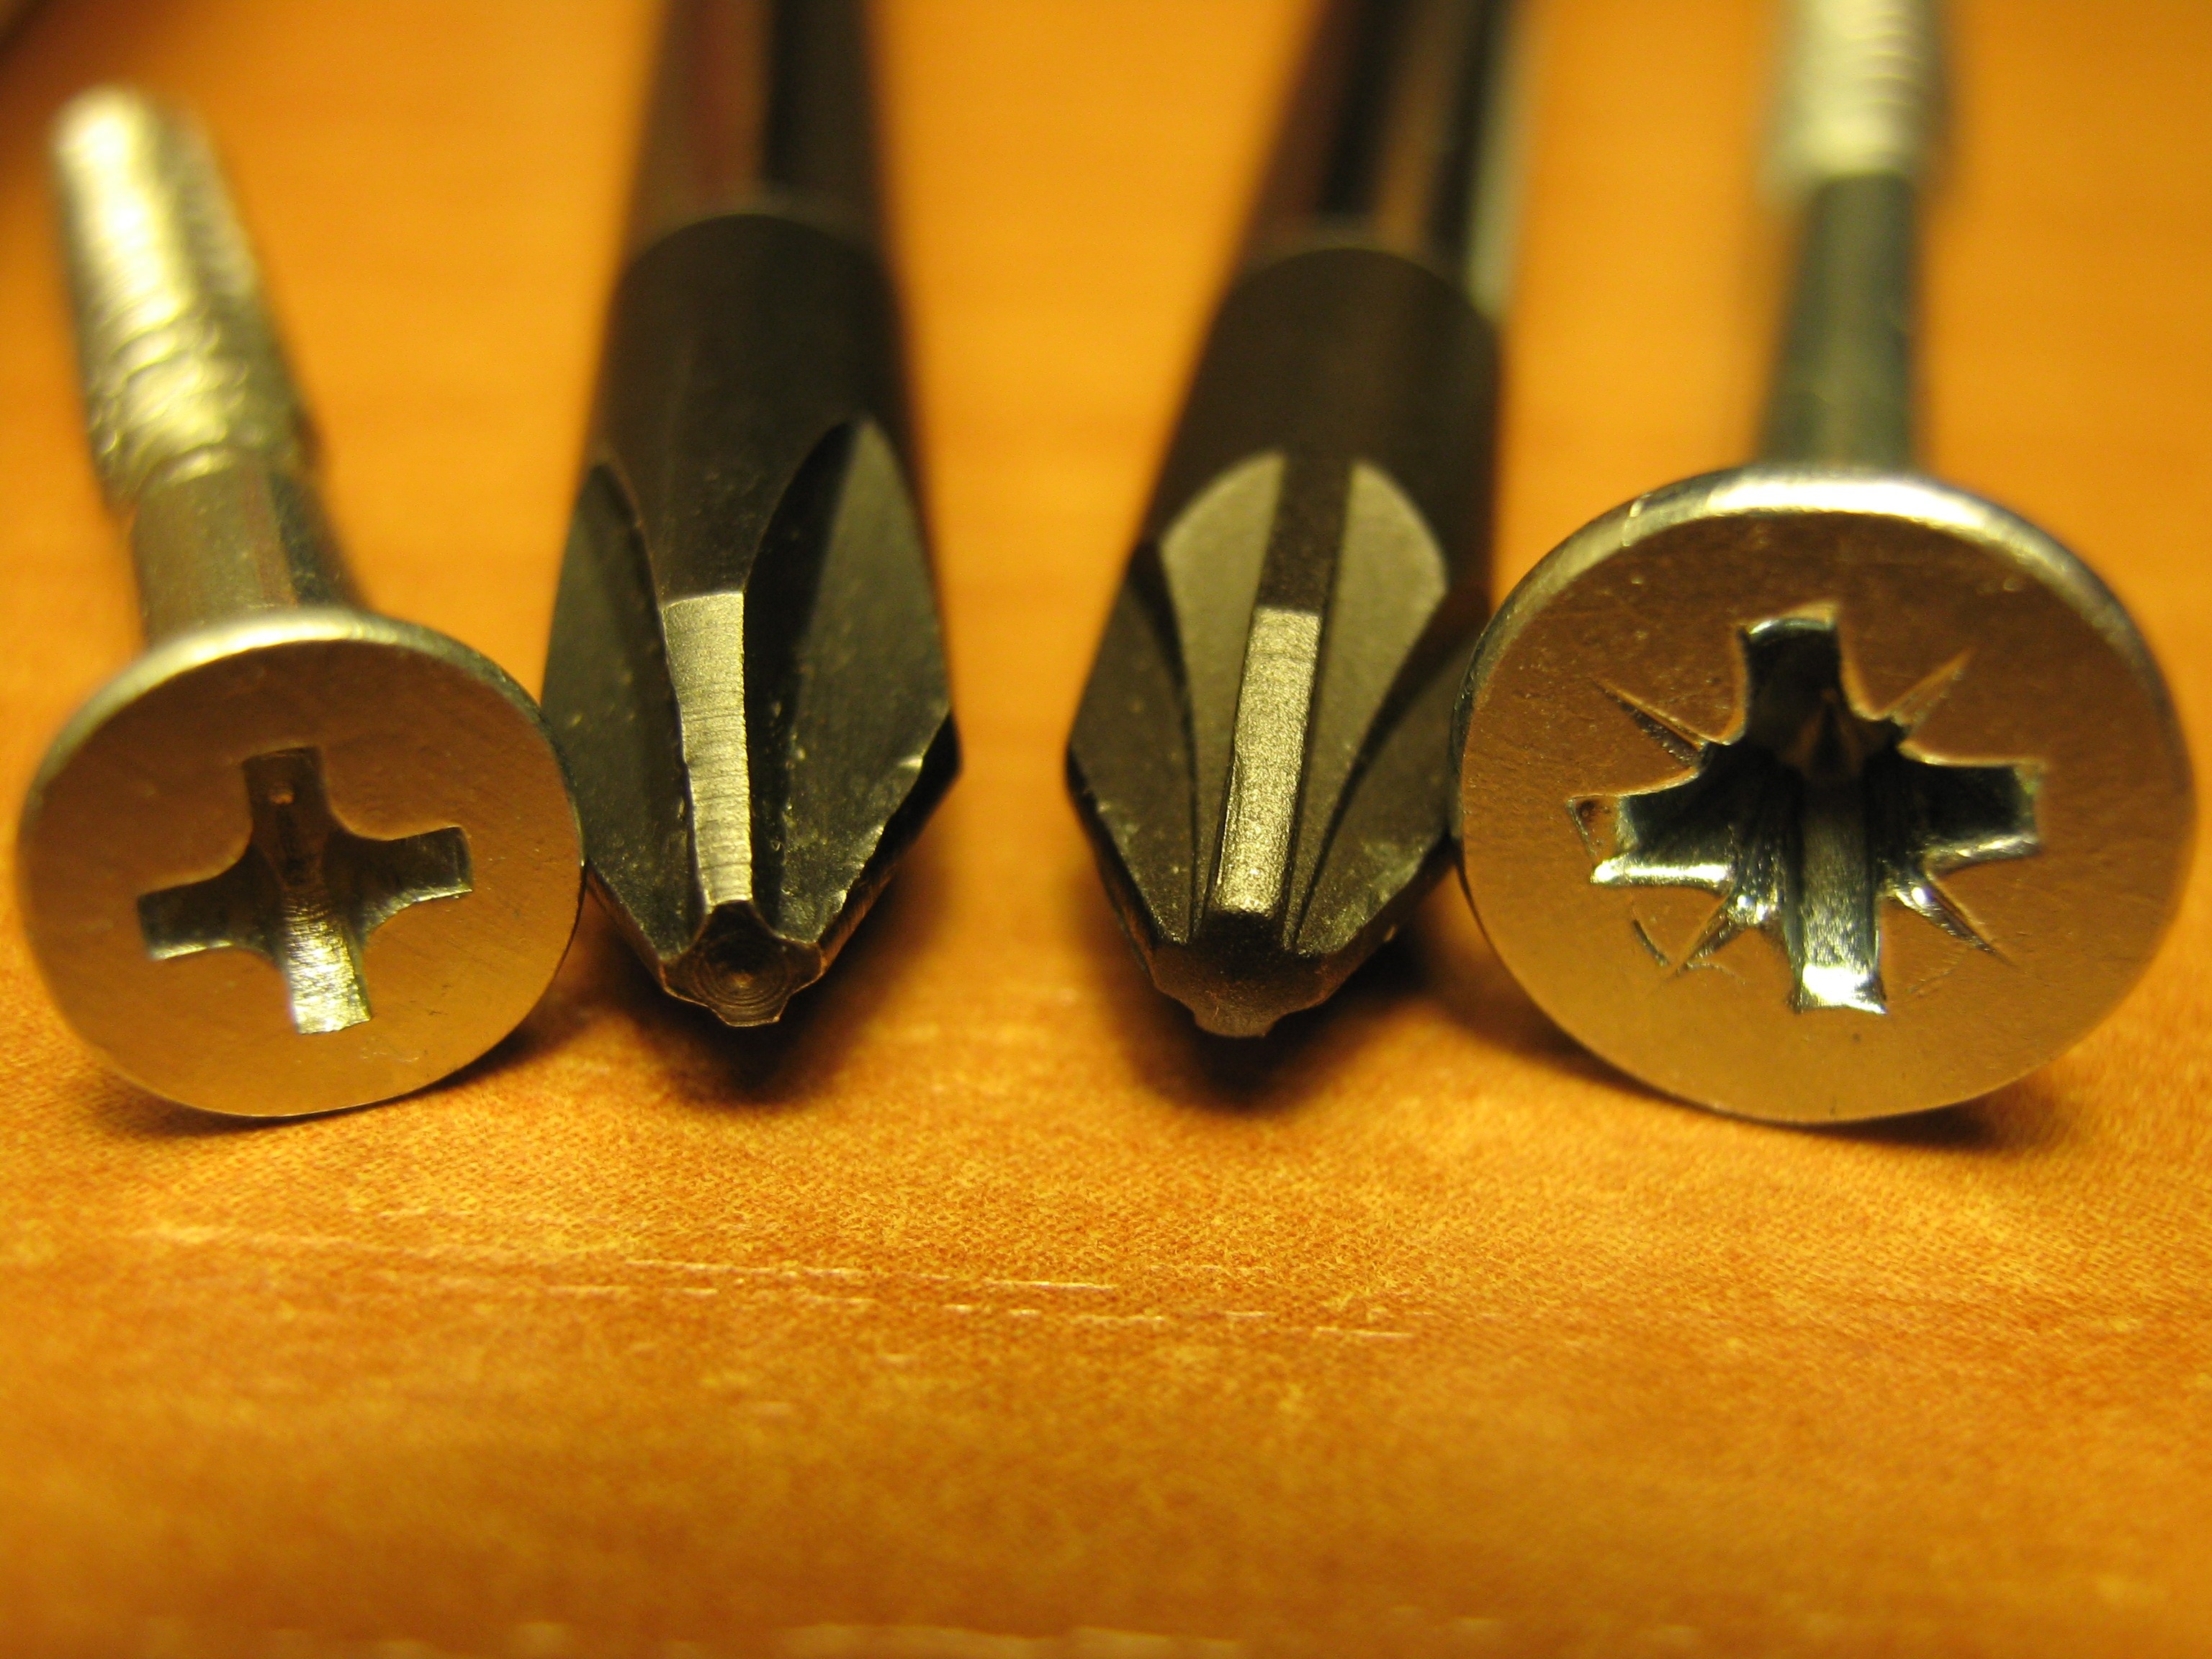 Phillips, Screw, Screwdrivers, Close-Up, close-up, no people